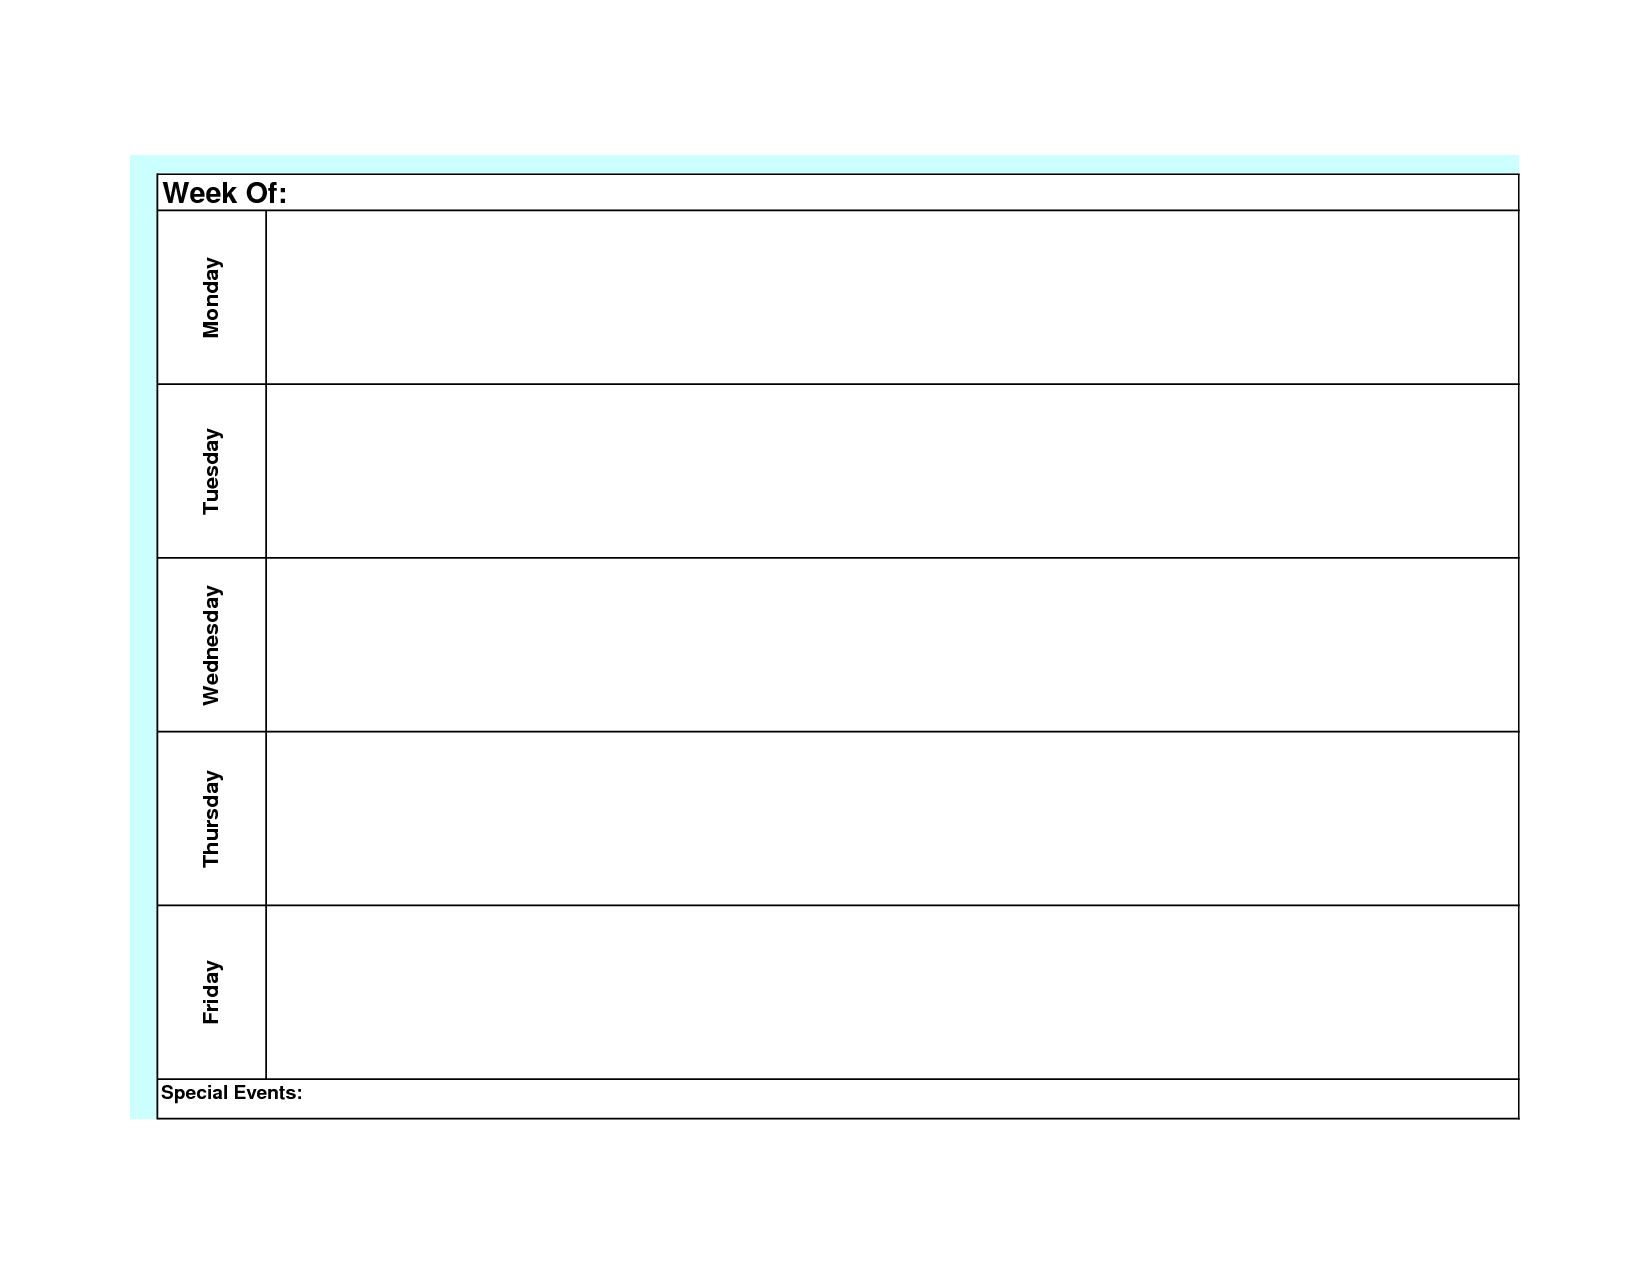 Blank Weekly Calendar Template Monday Friday | Weekly pertaining to Monday Through Friday Weekly Calendar Template